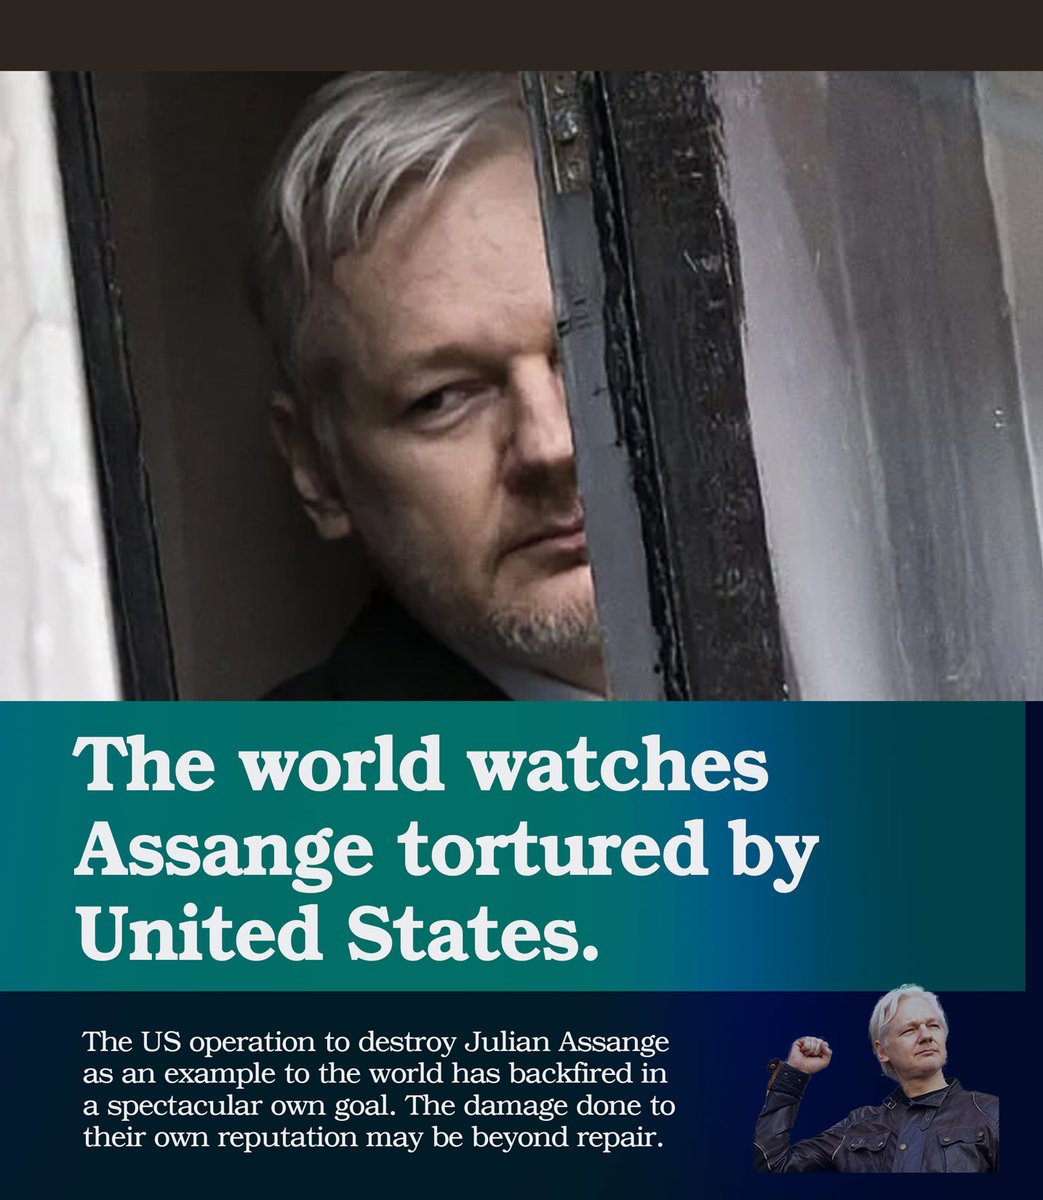 The US mission to make an example of Julian Assange with the aim of concealing crimes & protecting their reputation has backfired in a spectacular own goal. The decade long ruthless persecution of Julian has instead caused a world explosion of disgust & animosity upon themselves.